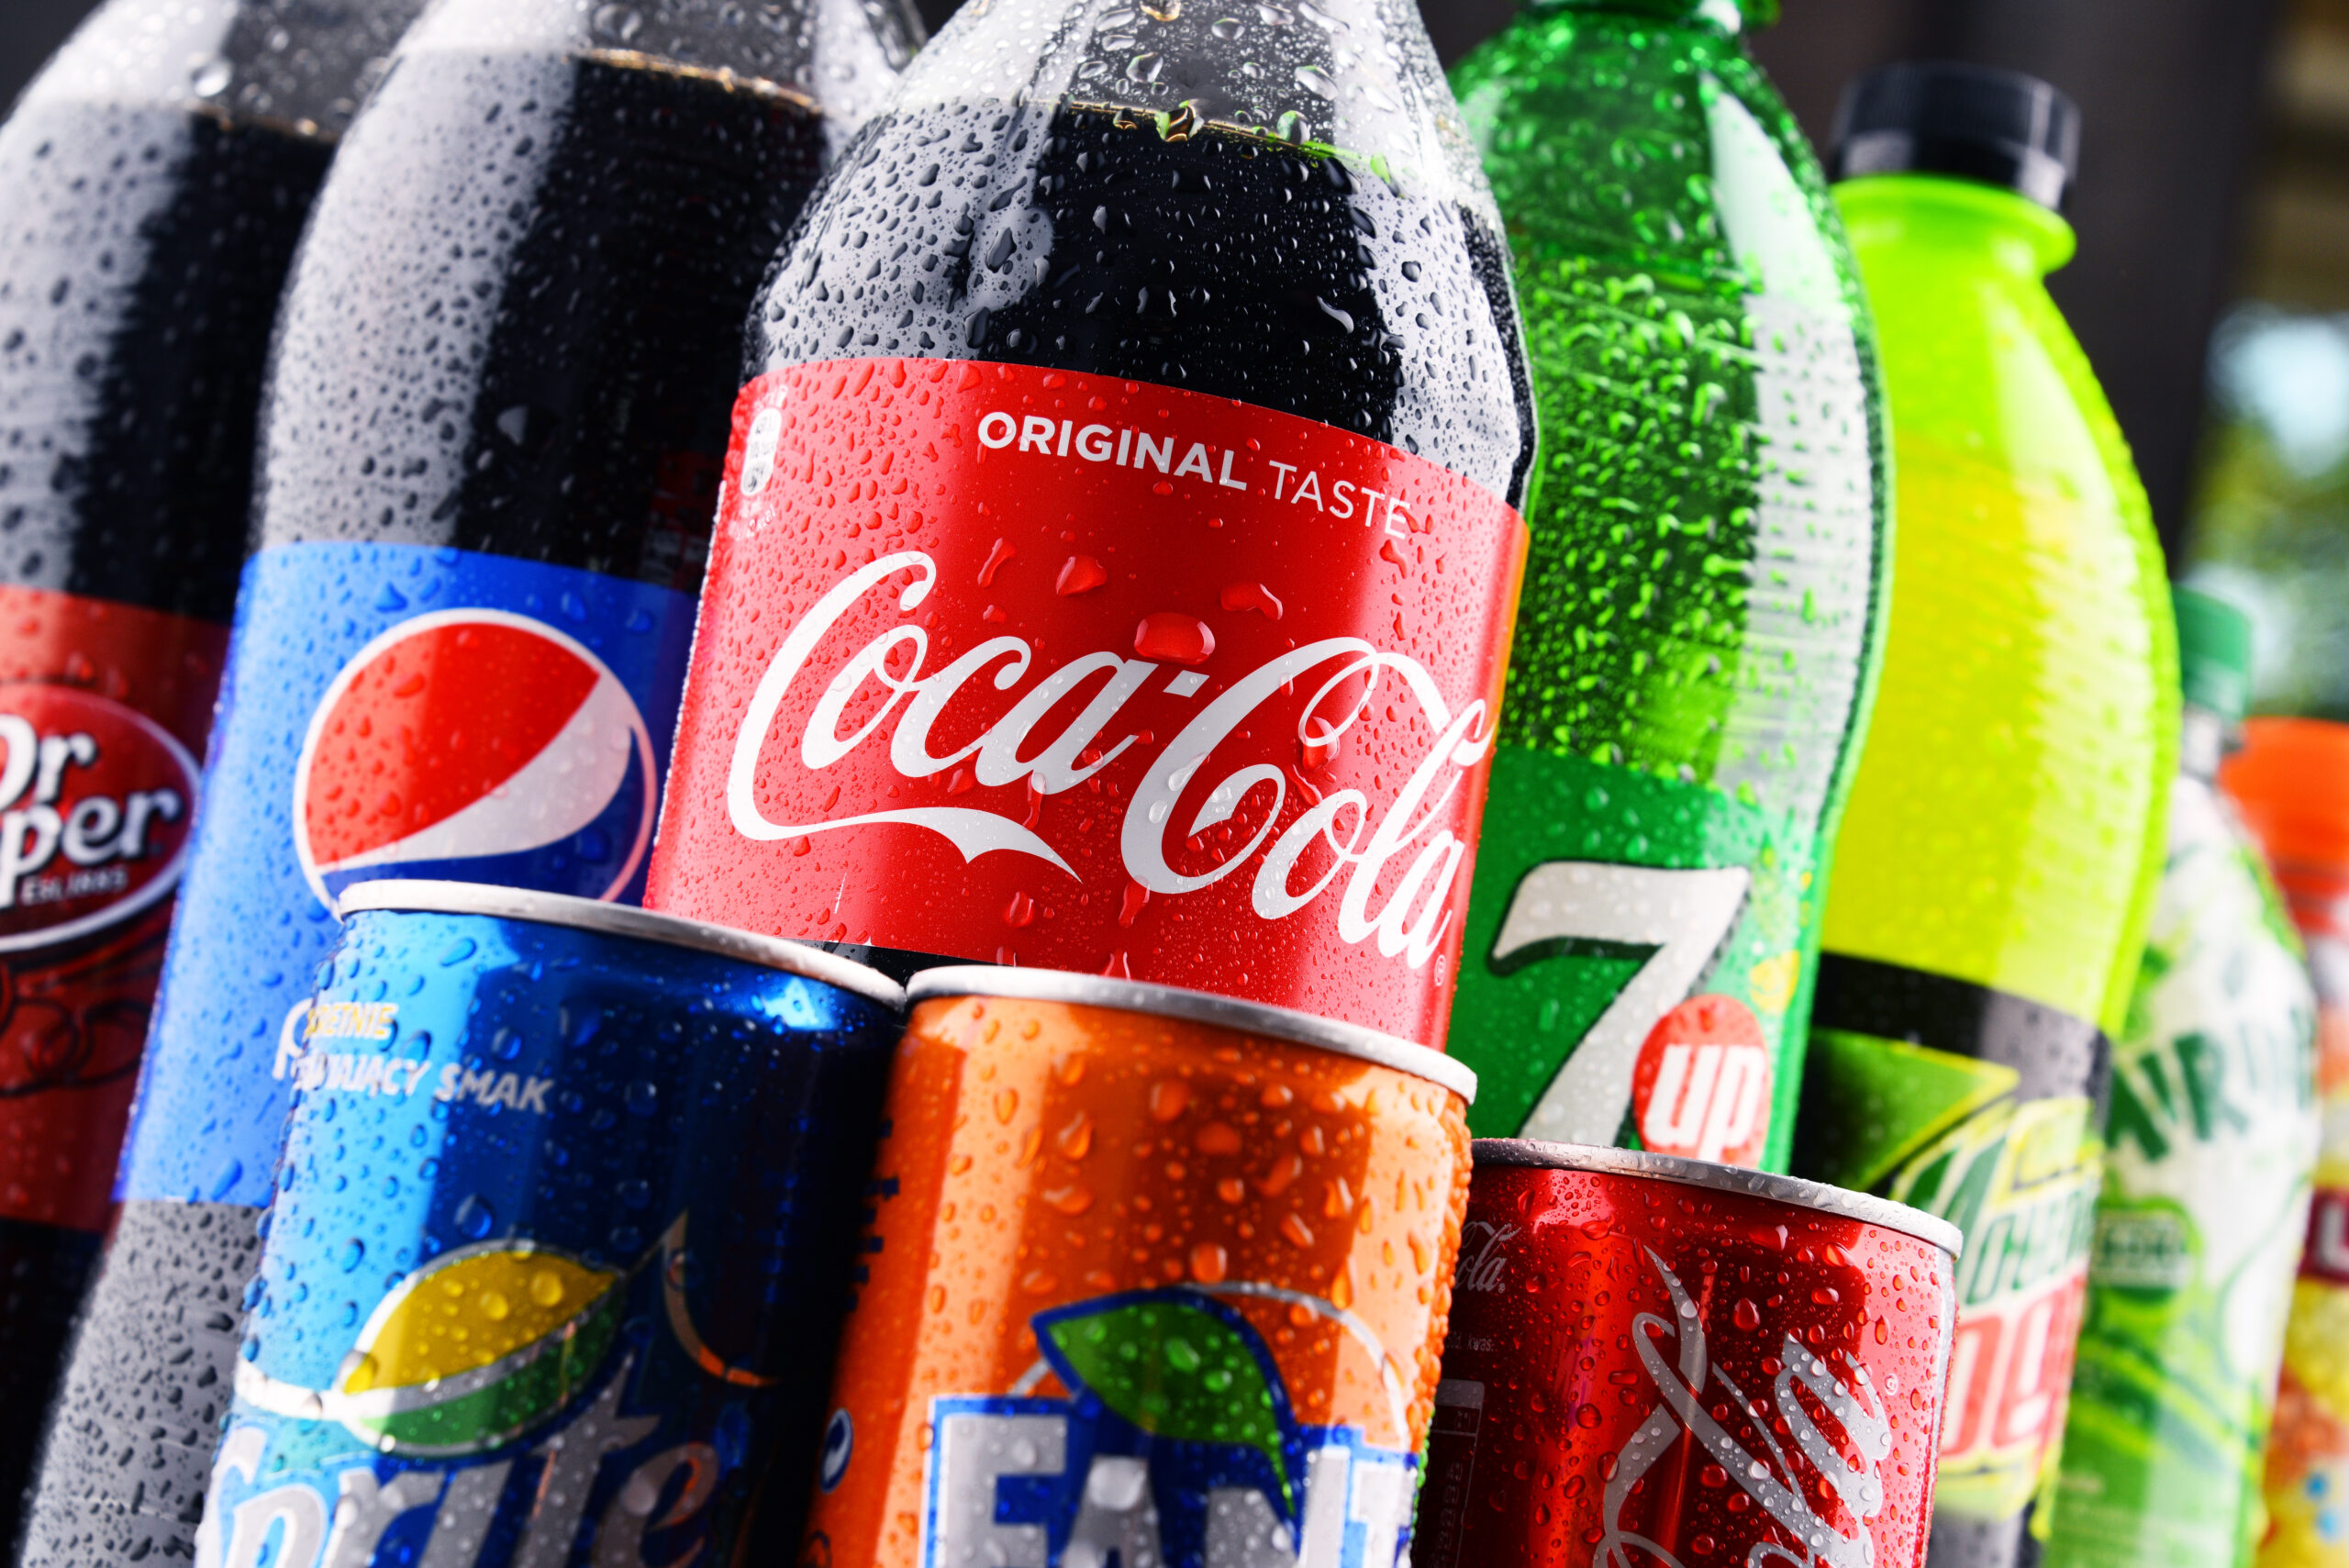 Taxing soda would help make kids healthier